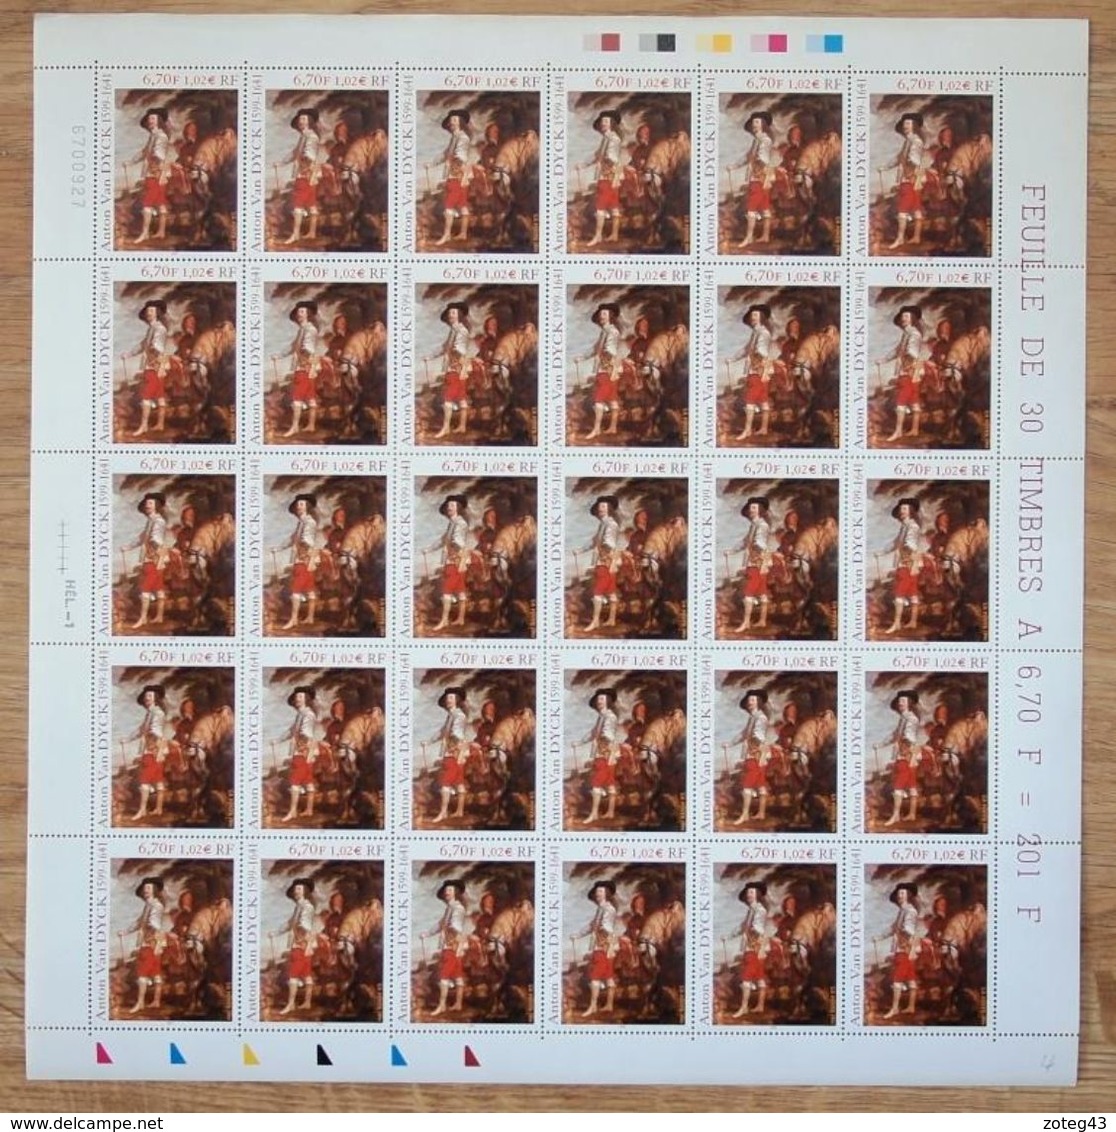 FRANCE 1999 FEUILLE COMPLETE DE 30 TIMBRES ** YVERT TELLIER N° 3289 VAN DYCK - Full Sheets